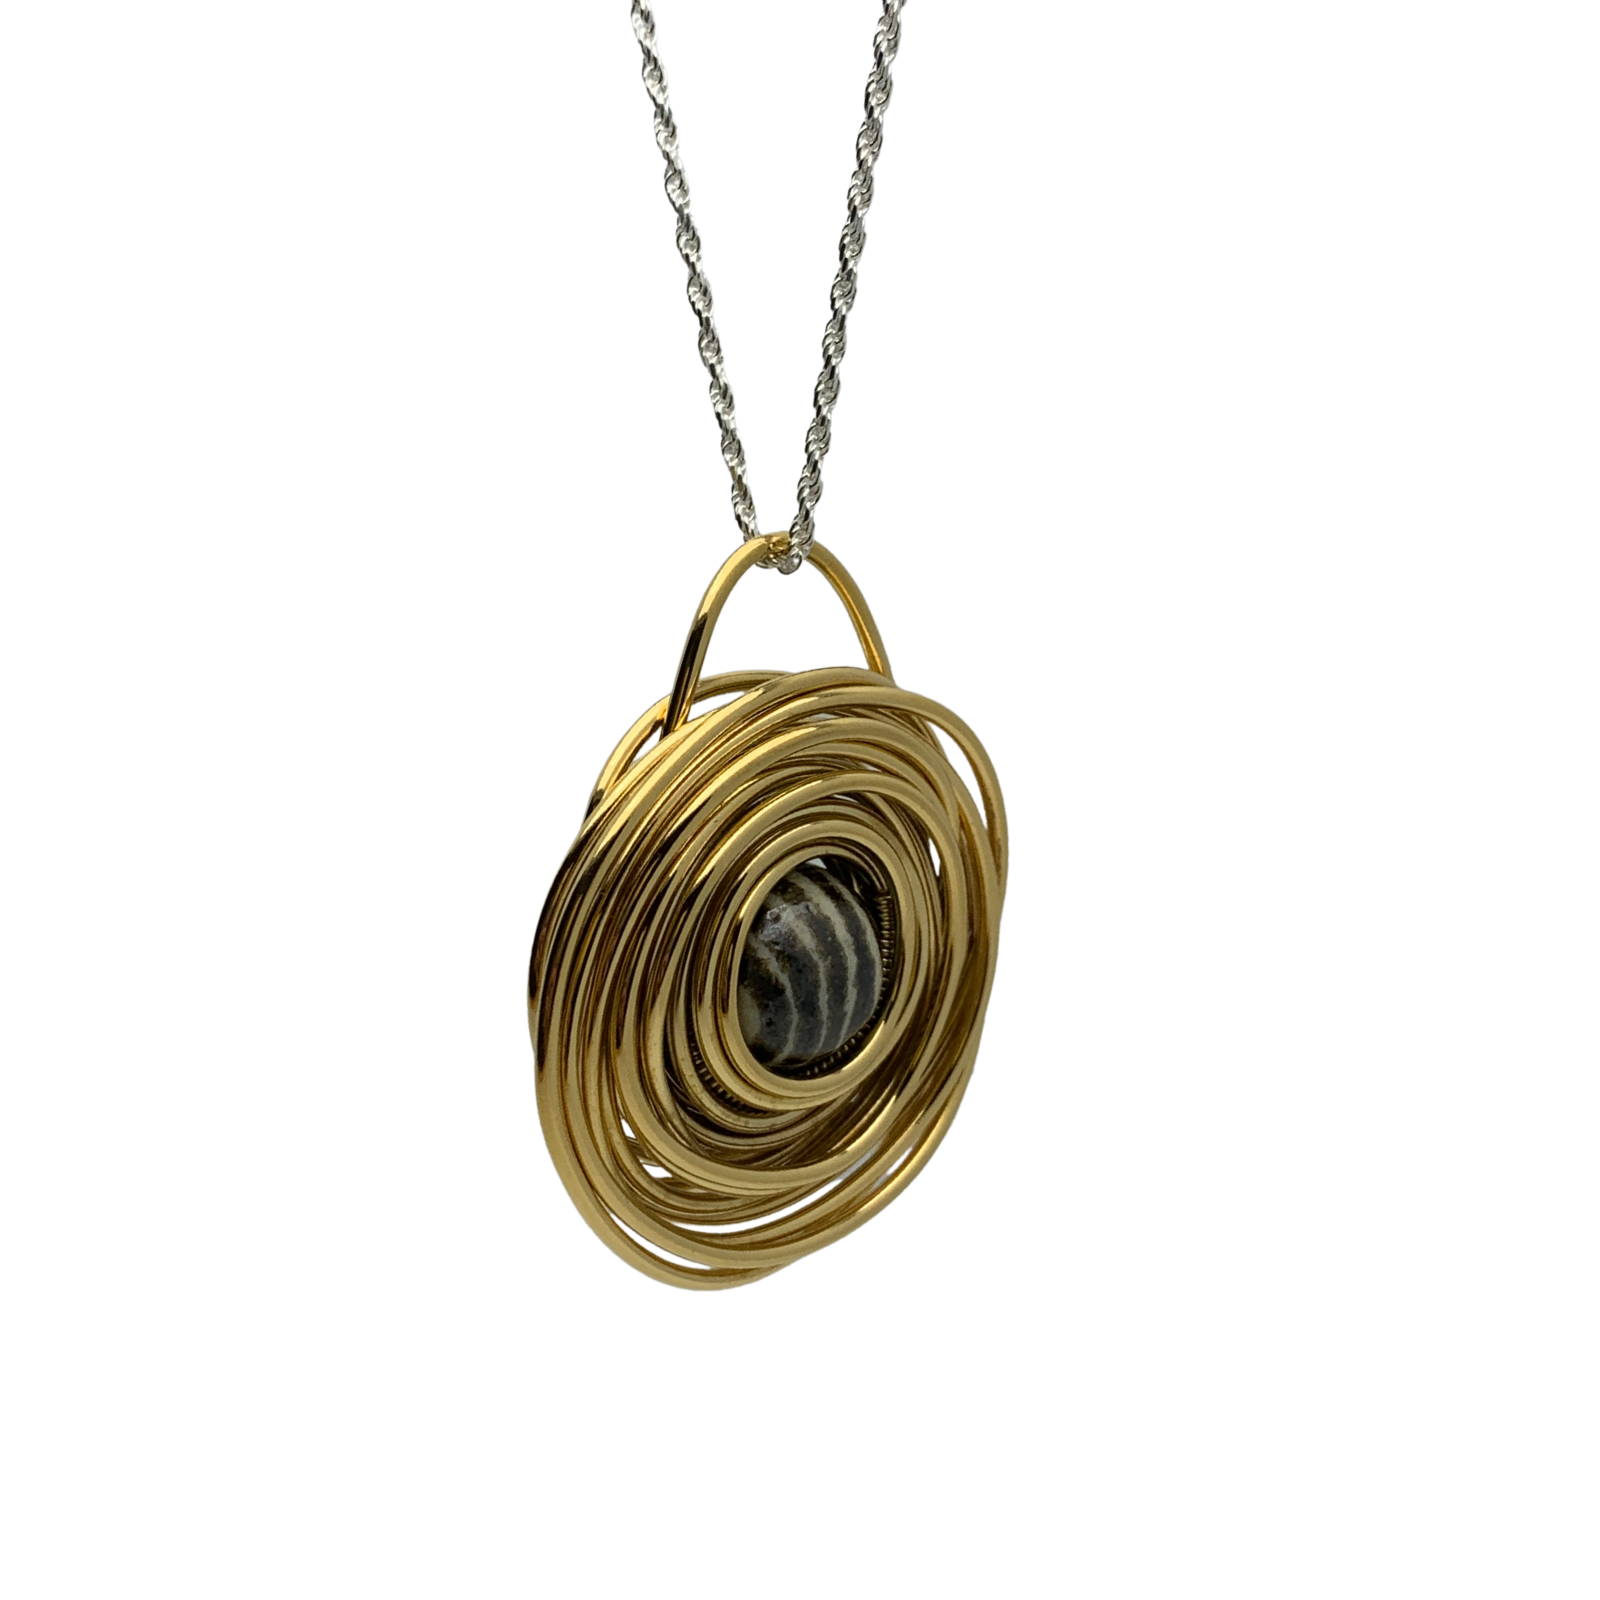 Big gold Swirl pendant of 24k Plated with black lines of Talavera. | MEXYCO